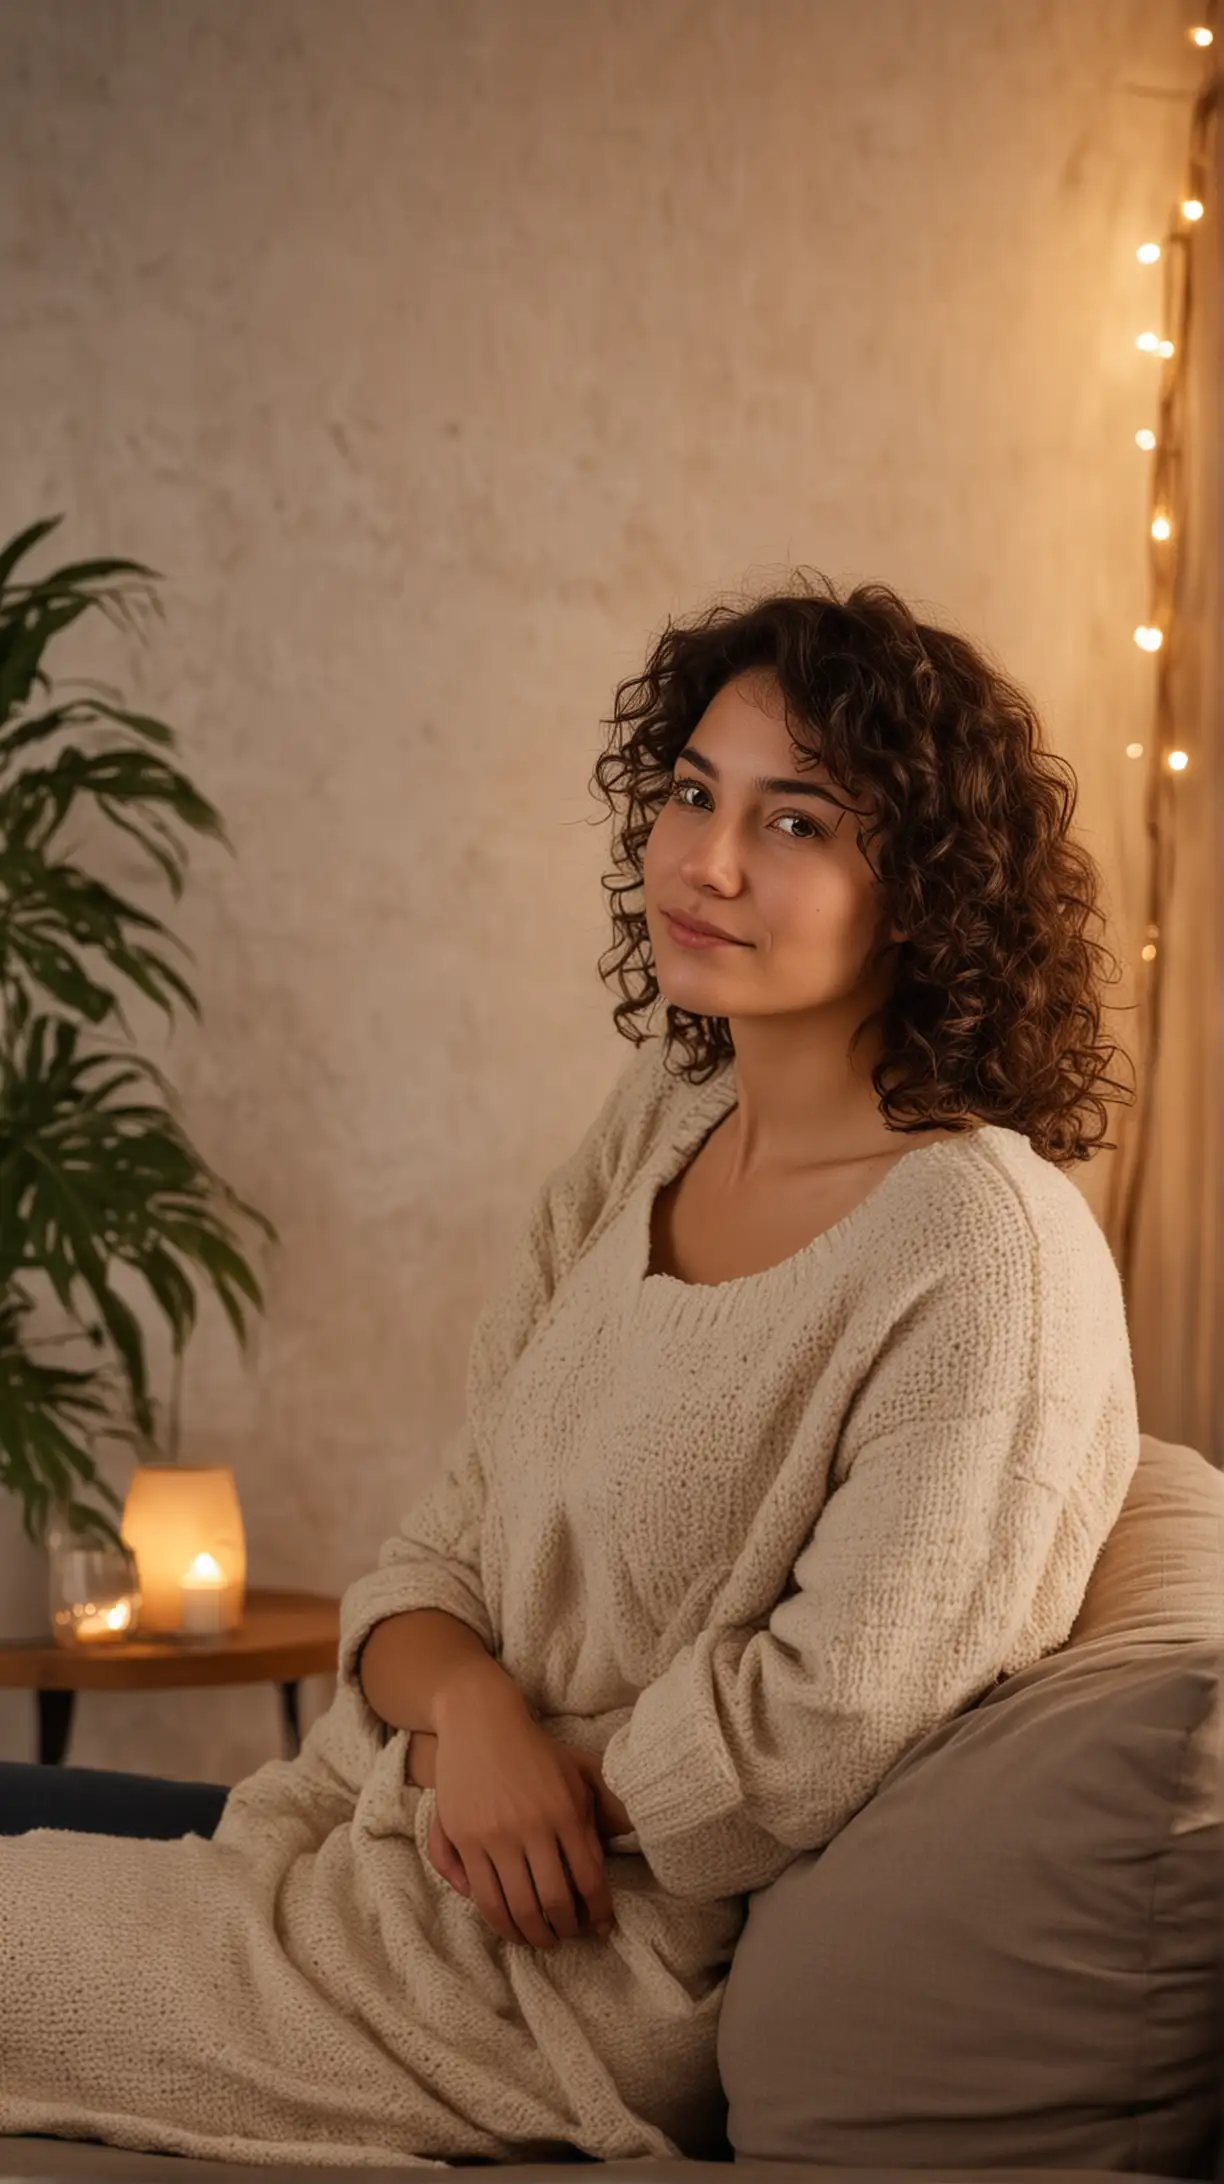 Relaxed Person Sitting in Cozy Living Room